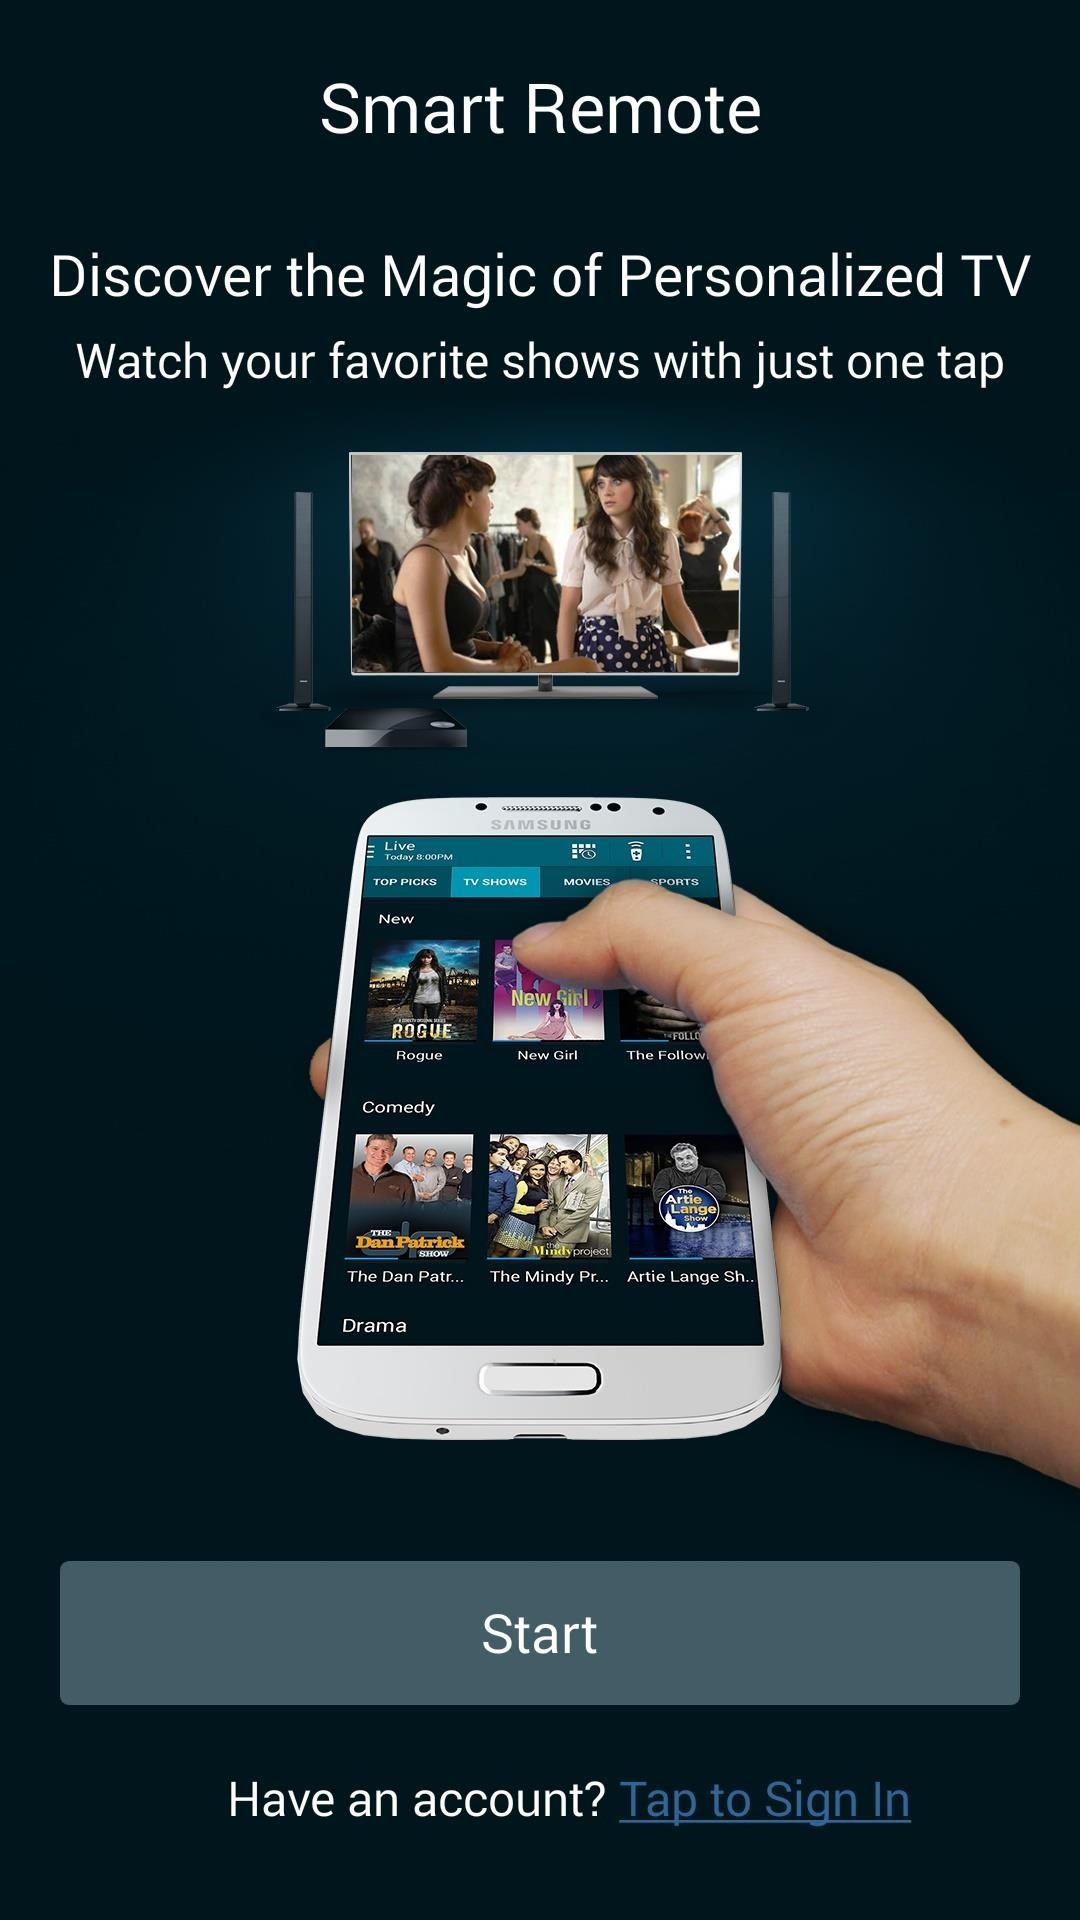 Get the New 'Smart Remote' App from the Samsung Galaxy S6 on Any Galaxy Device